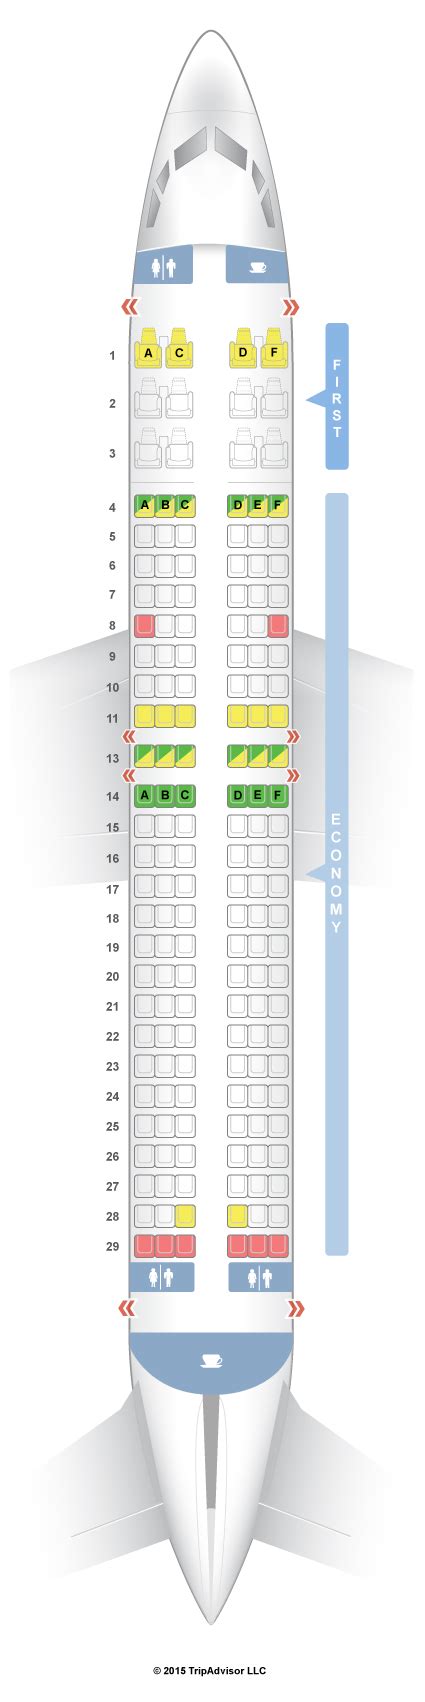 sun country boeing 737-800 seating chart